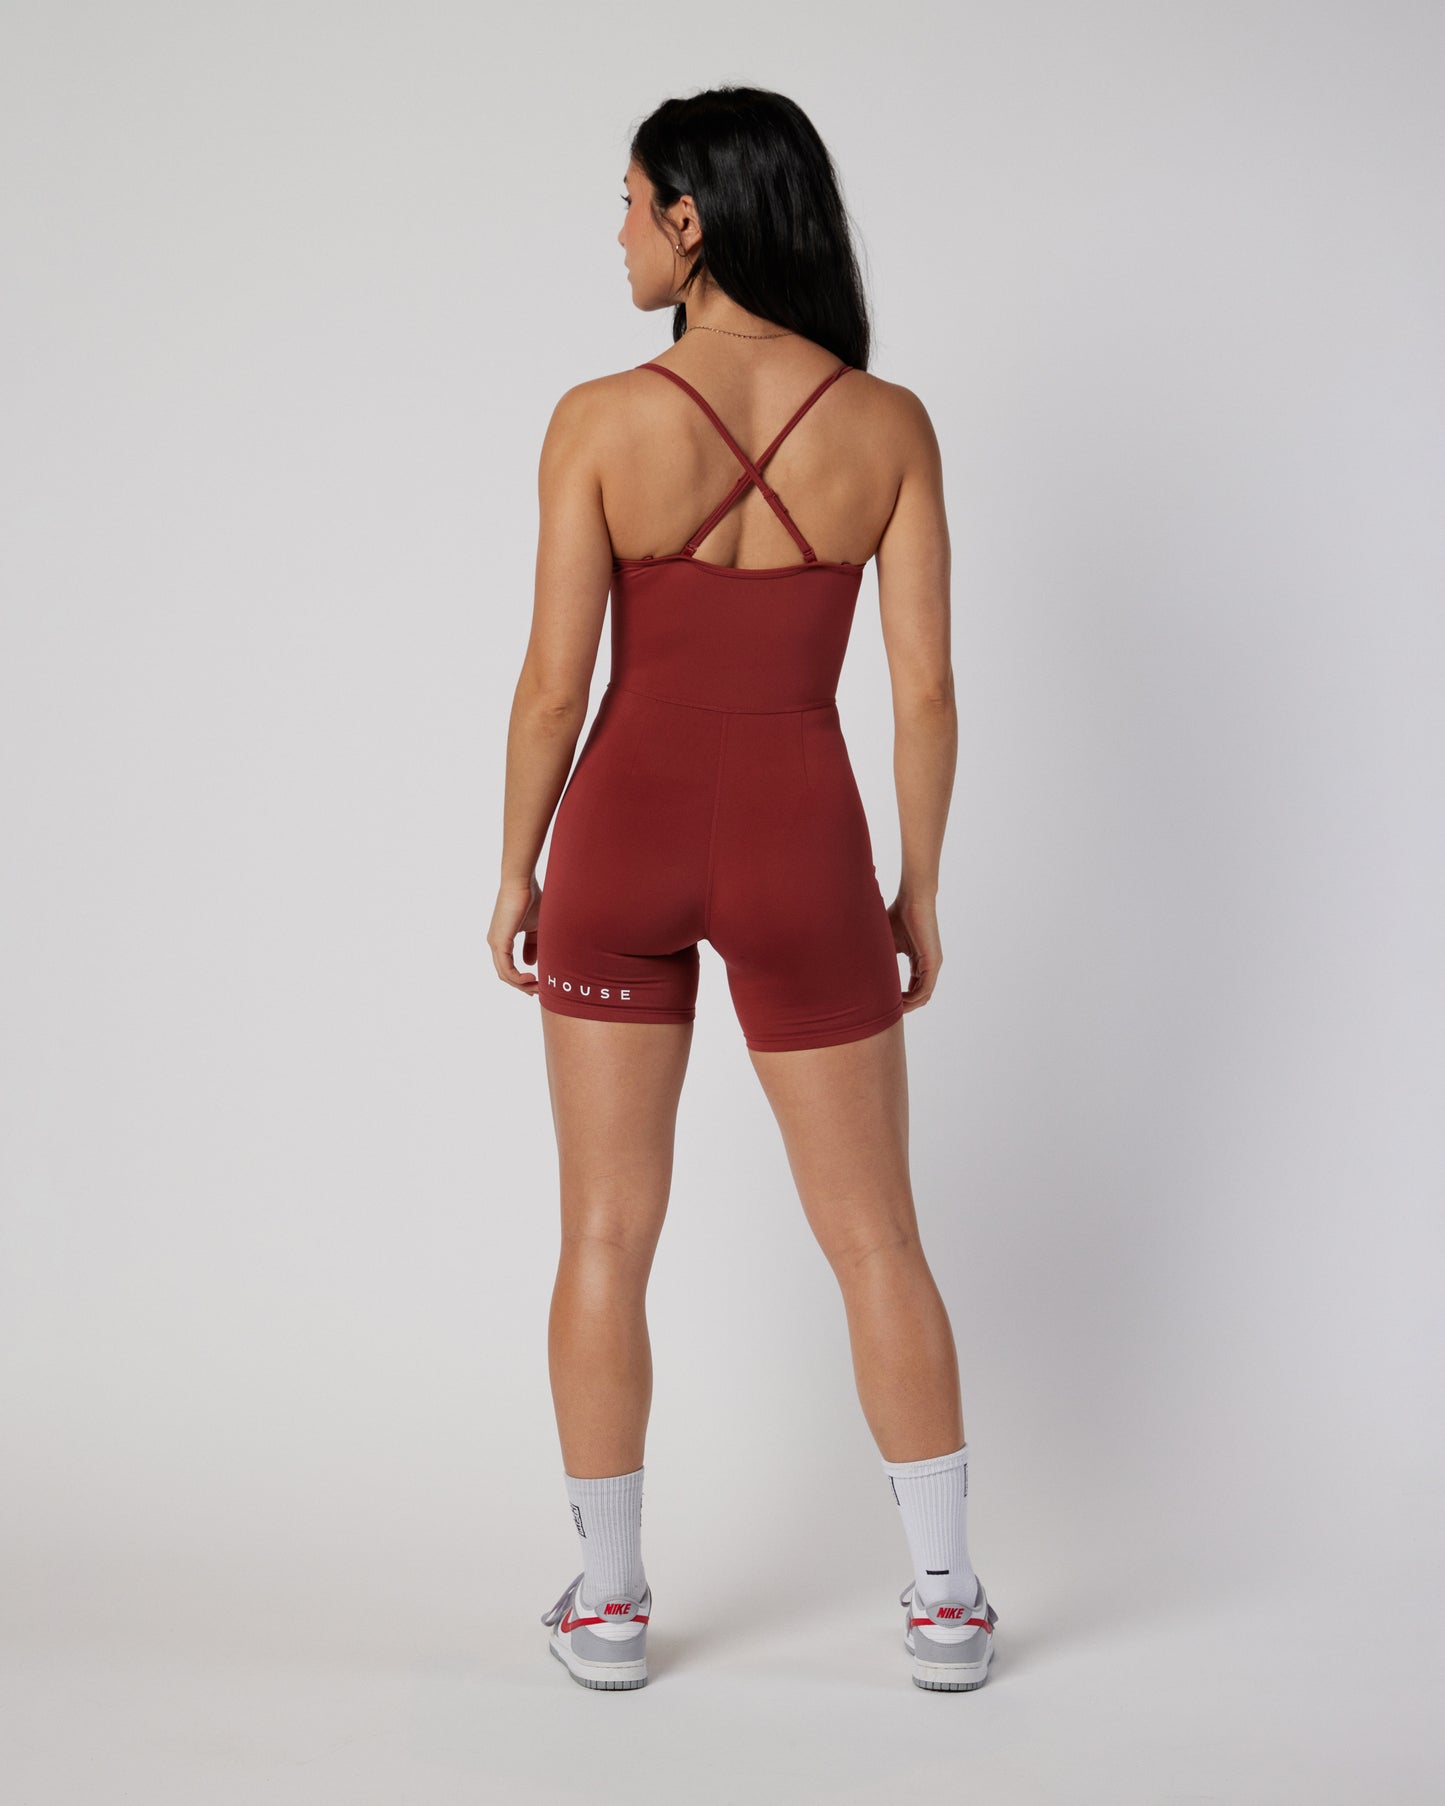 Womens sports one piece in Mars Red